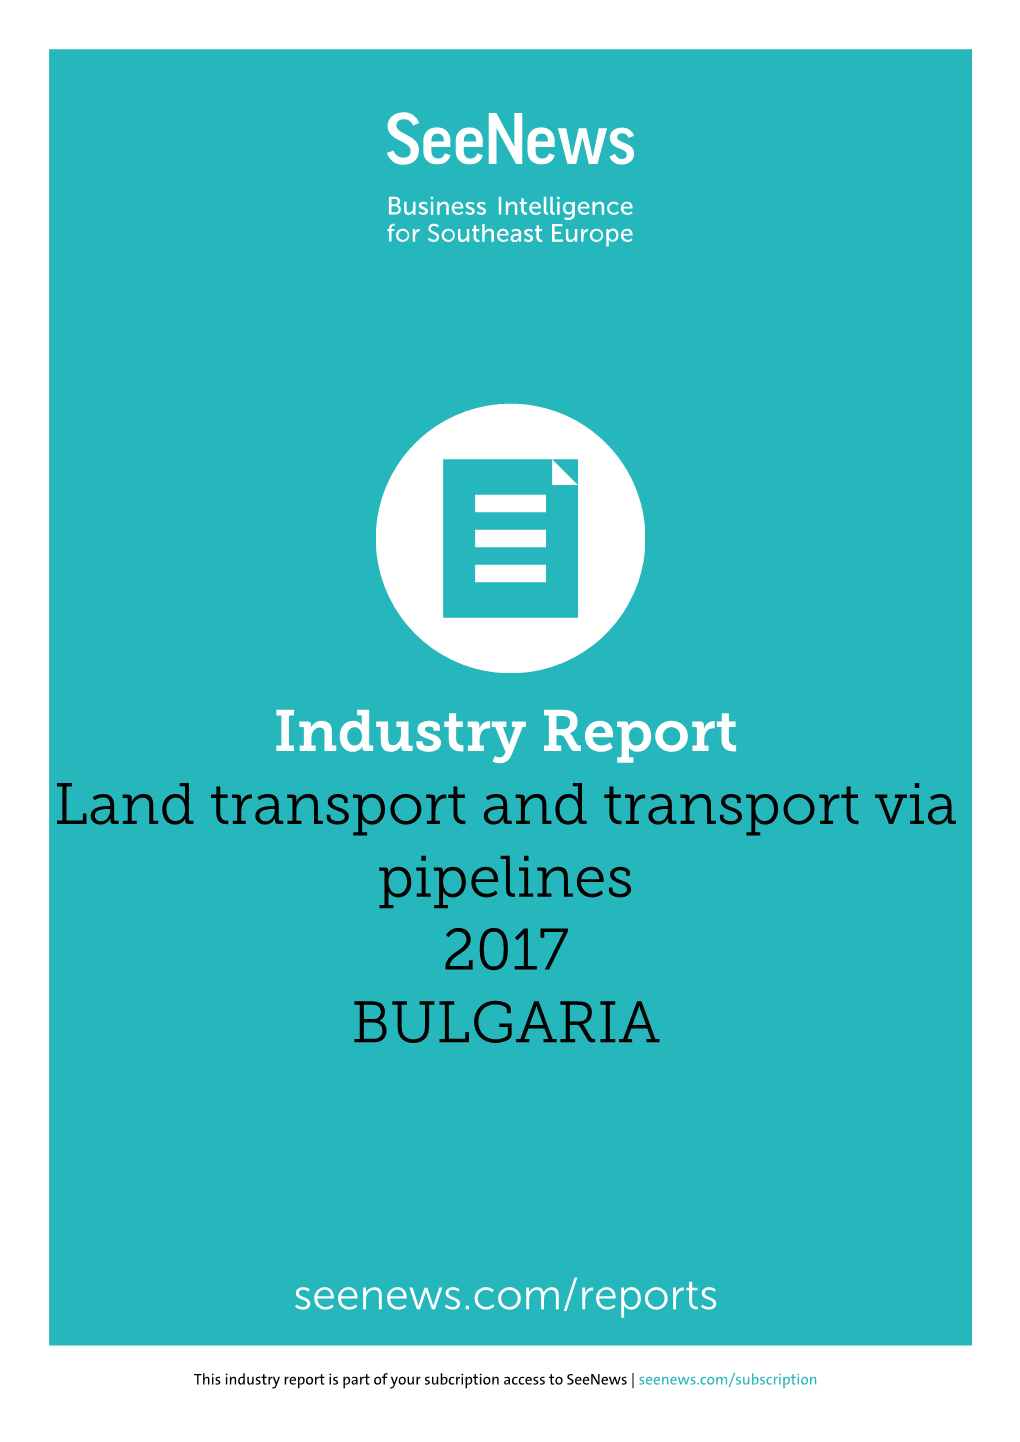 Industry Report Land Transport and Transport Via Pipelines 2017 BULGARIA